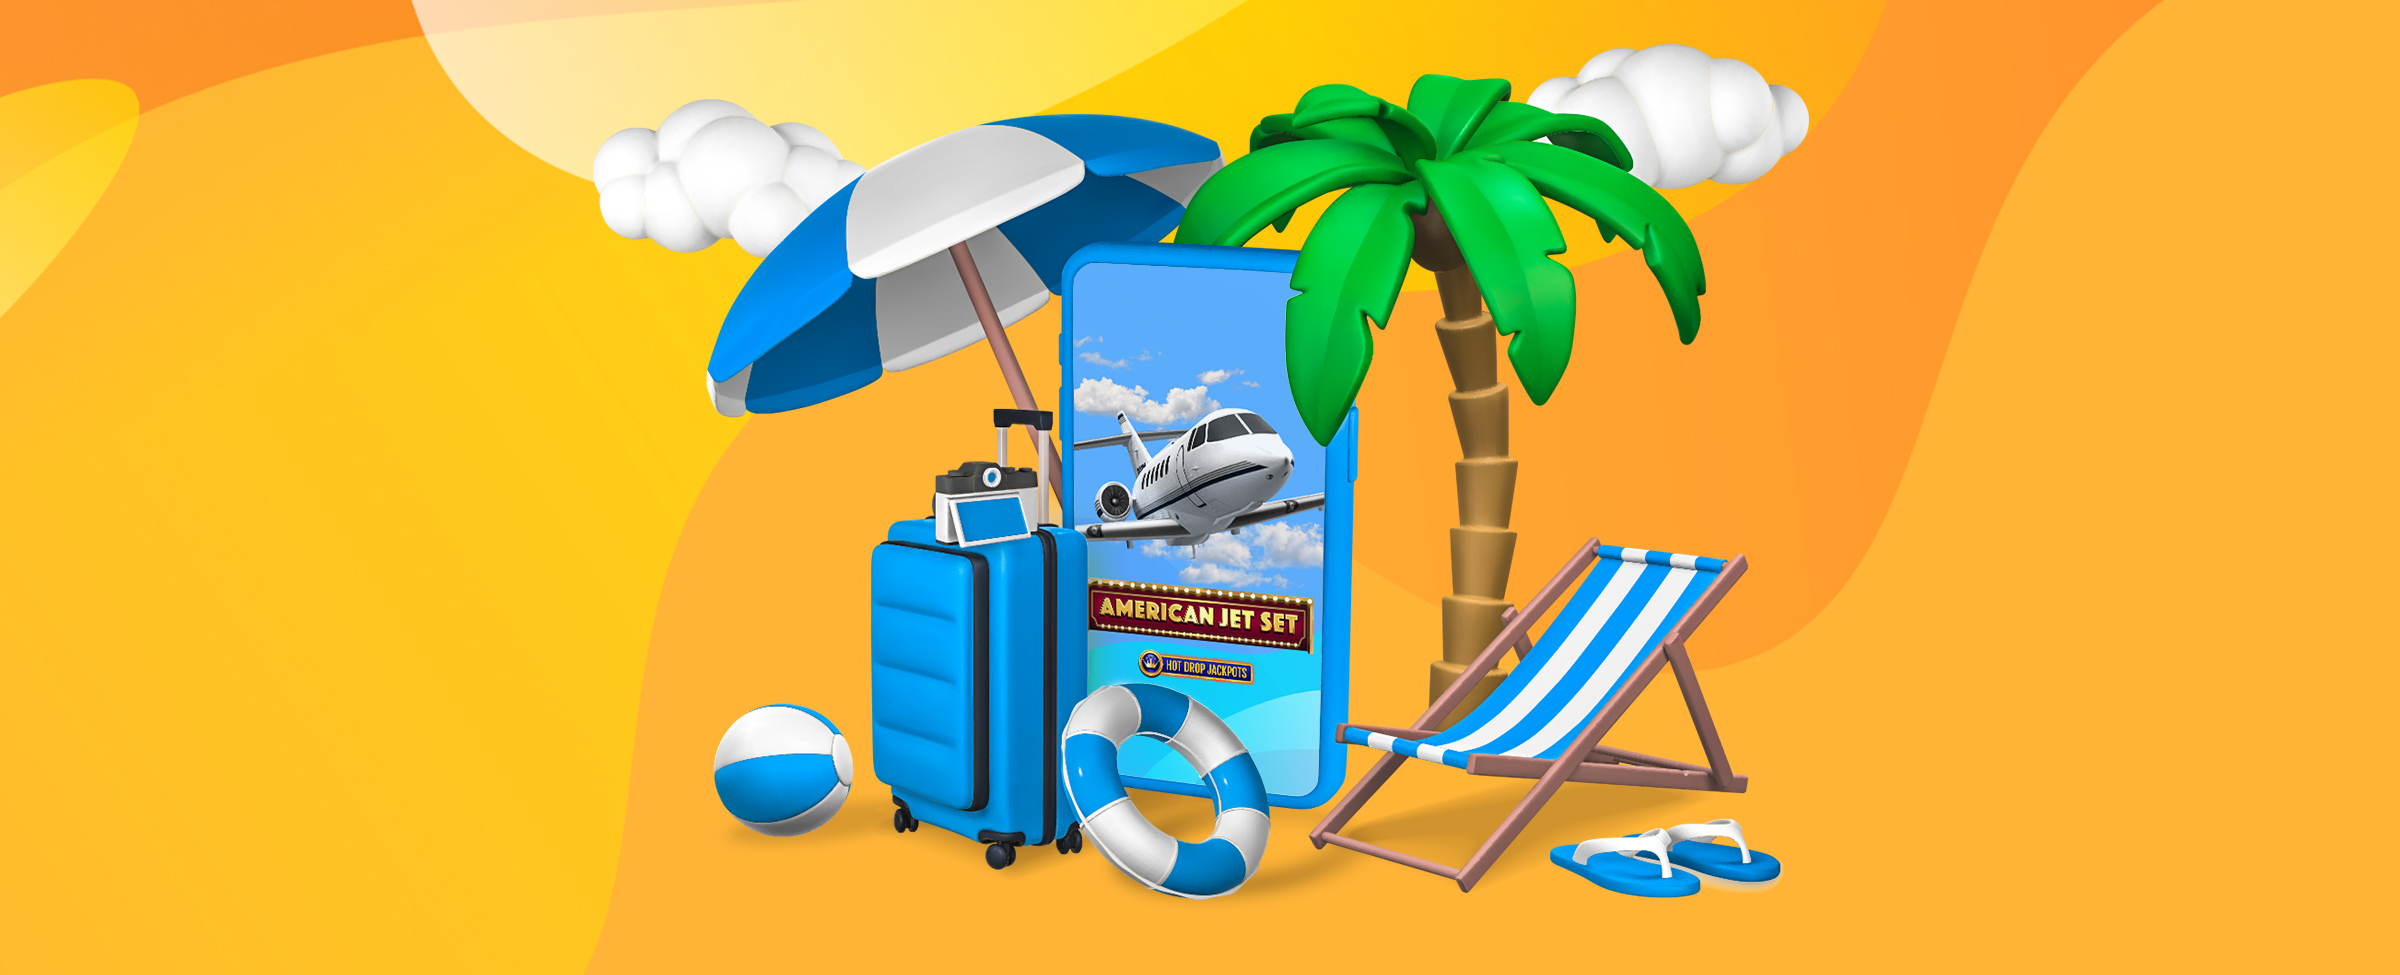 A 3D-animated scene depicting various elements of a vacation on a yellow background: a palm tree, a bright blue and white umbrella, a life-size blue phone showing the graphics from the SlotsLV slots game, American Jet Set Hot Drop Jackpots, a blue and white inflatable ball and floating ring resting against a large blue travel suitcase, a blue and white canvas hammock, and blue and white flip flops.